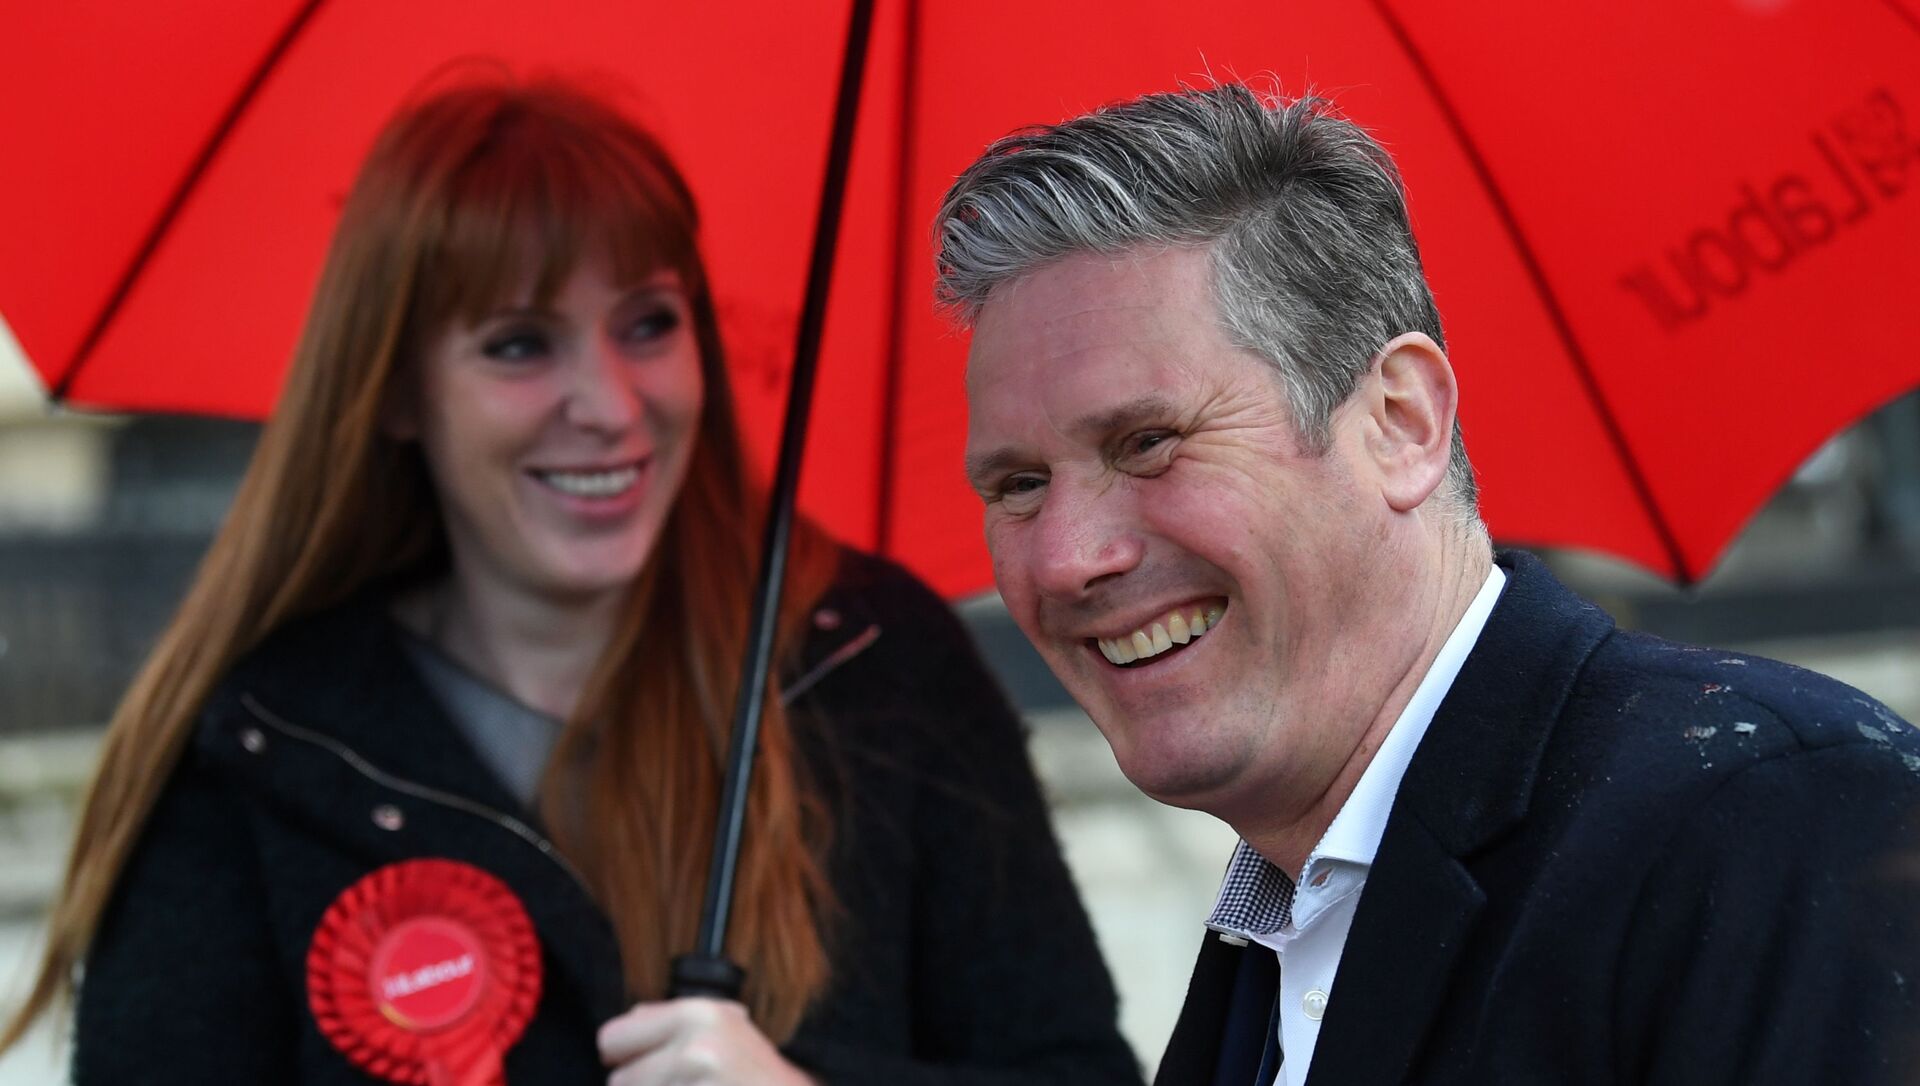 Labour Party leader Keir Starmer campaigns ahead of local elections, in Birmingham - Sputnik International, 1920, 11.05.2021